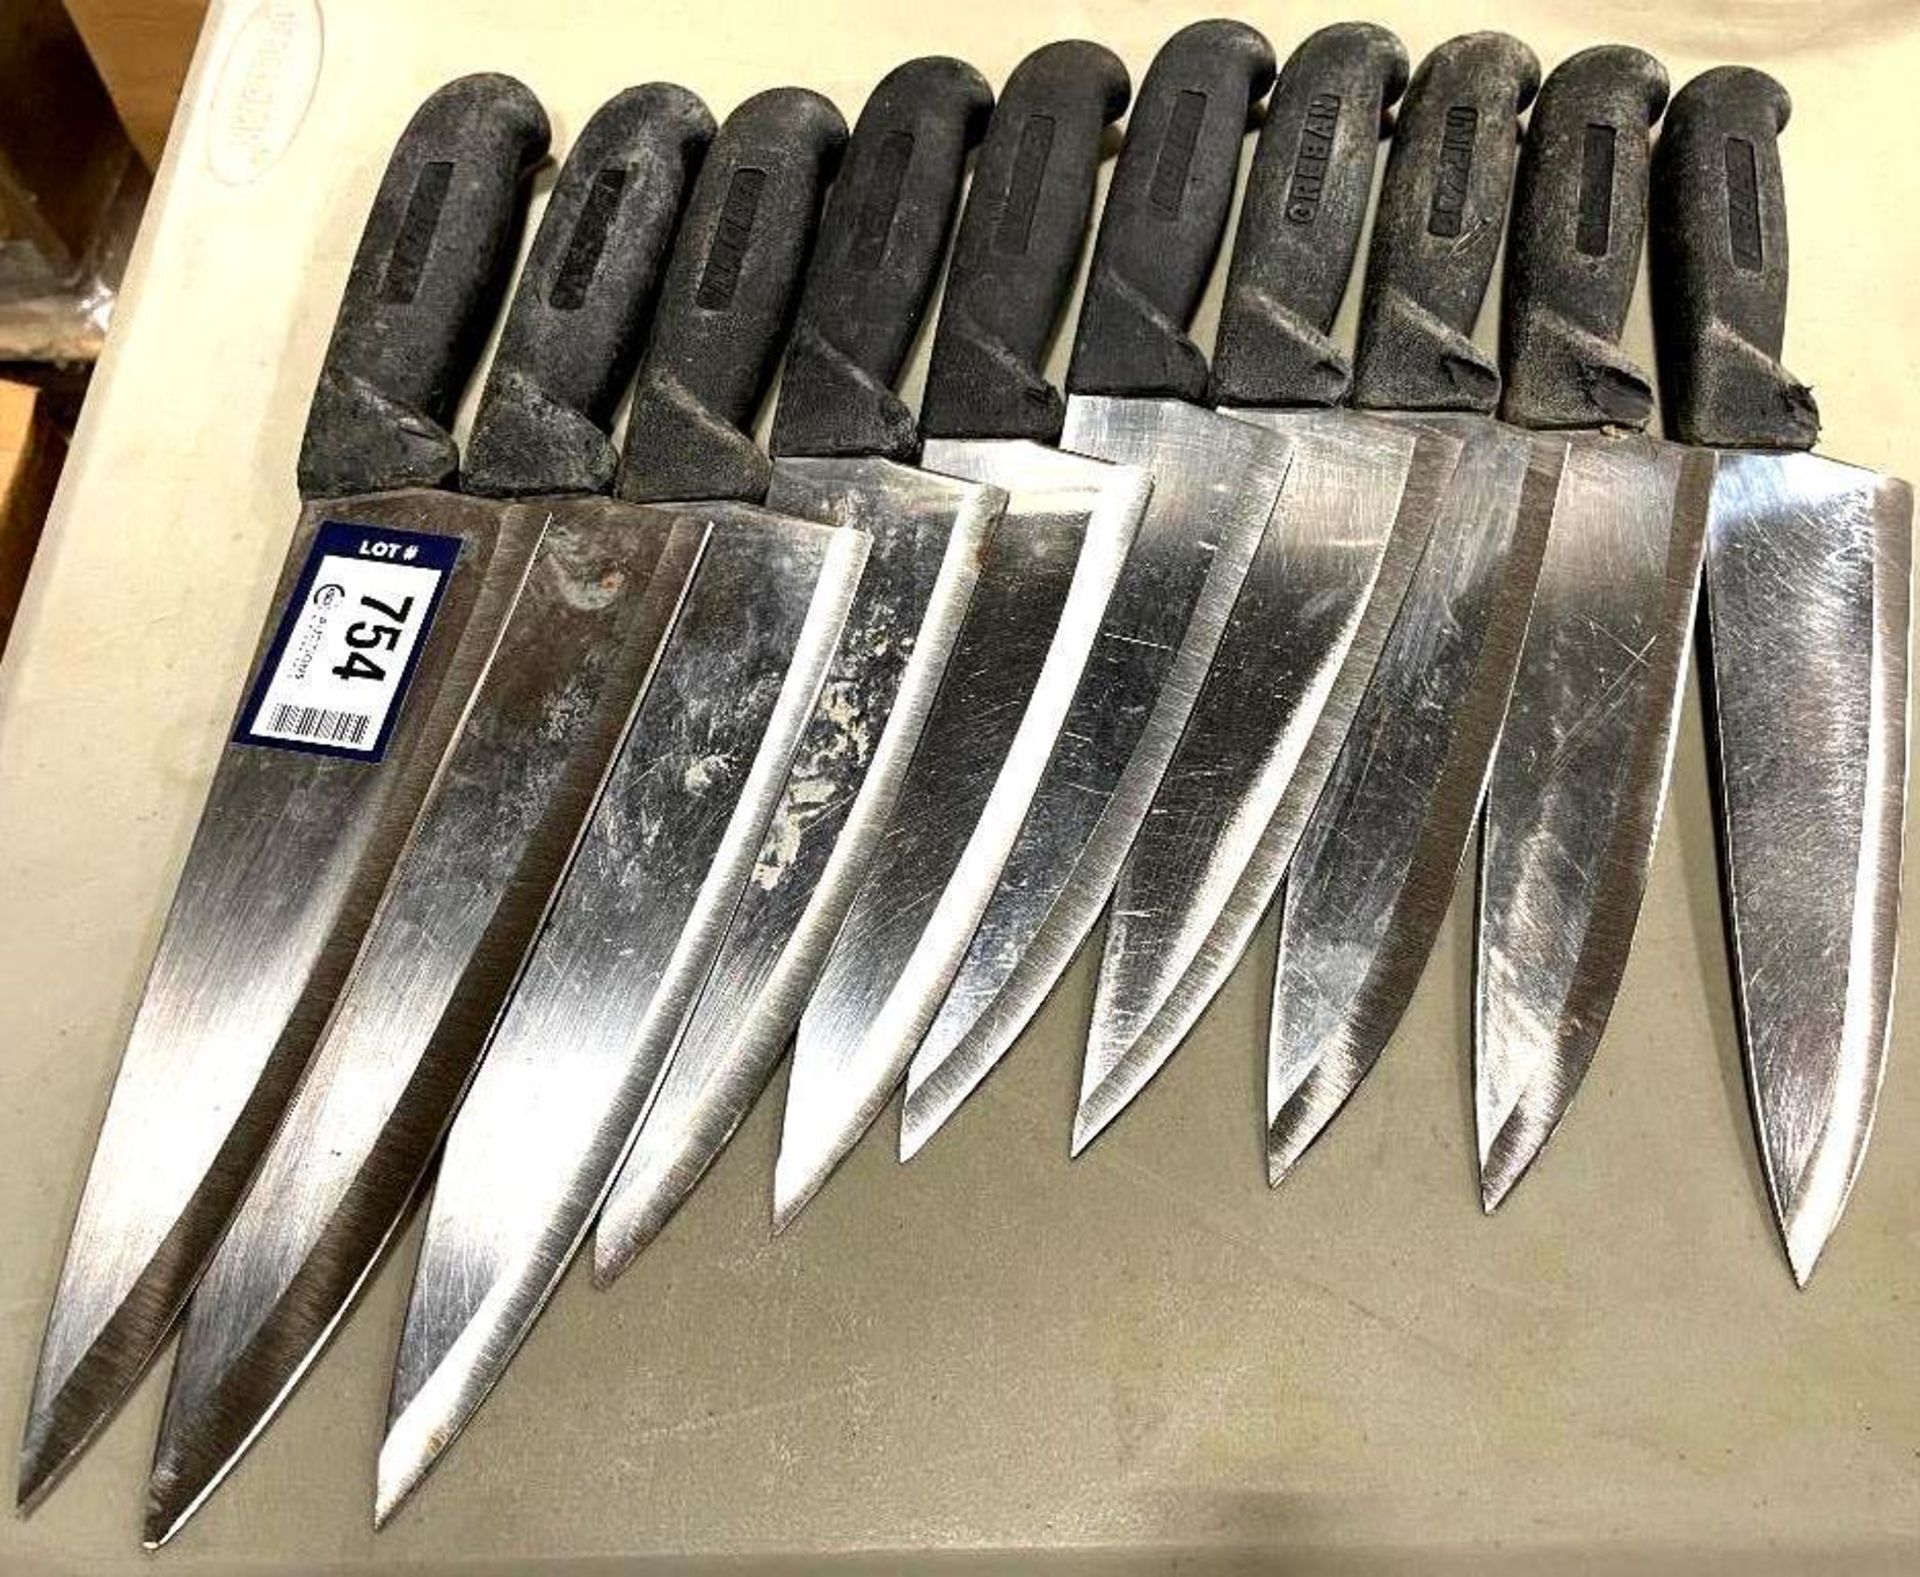 LOT OF 10 USED SHARPENED KNIVES - Image 2 of 3